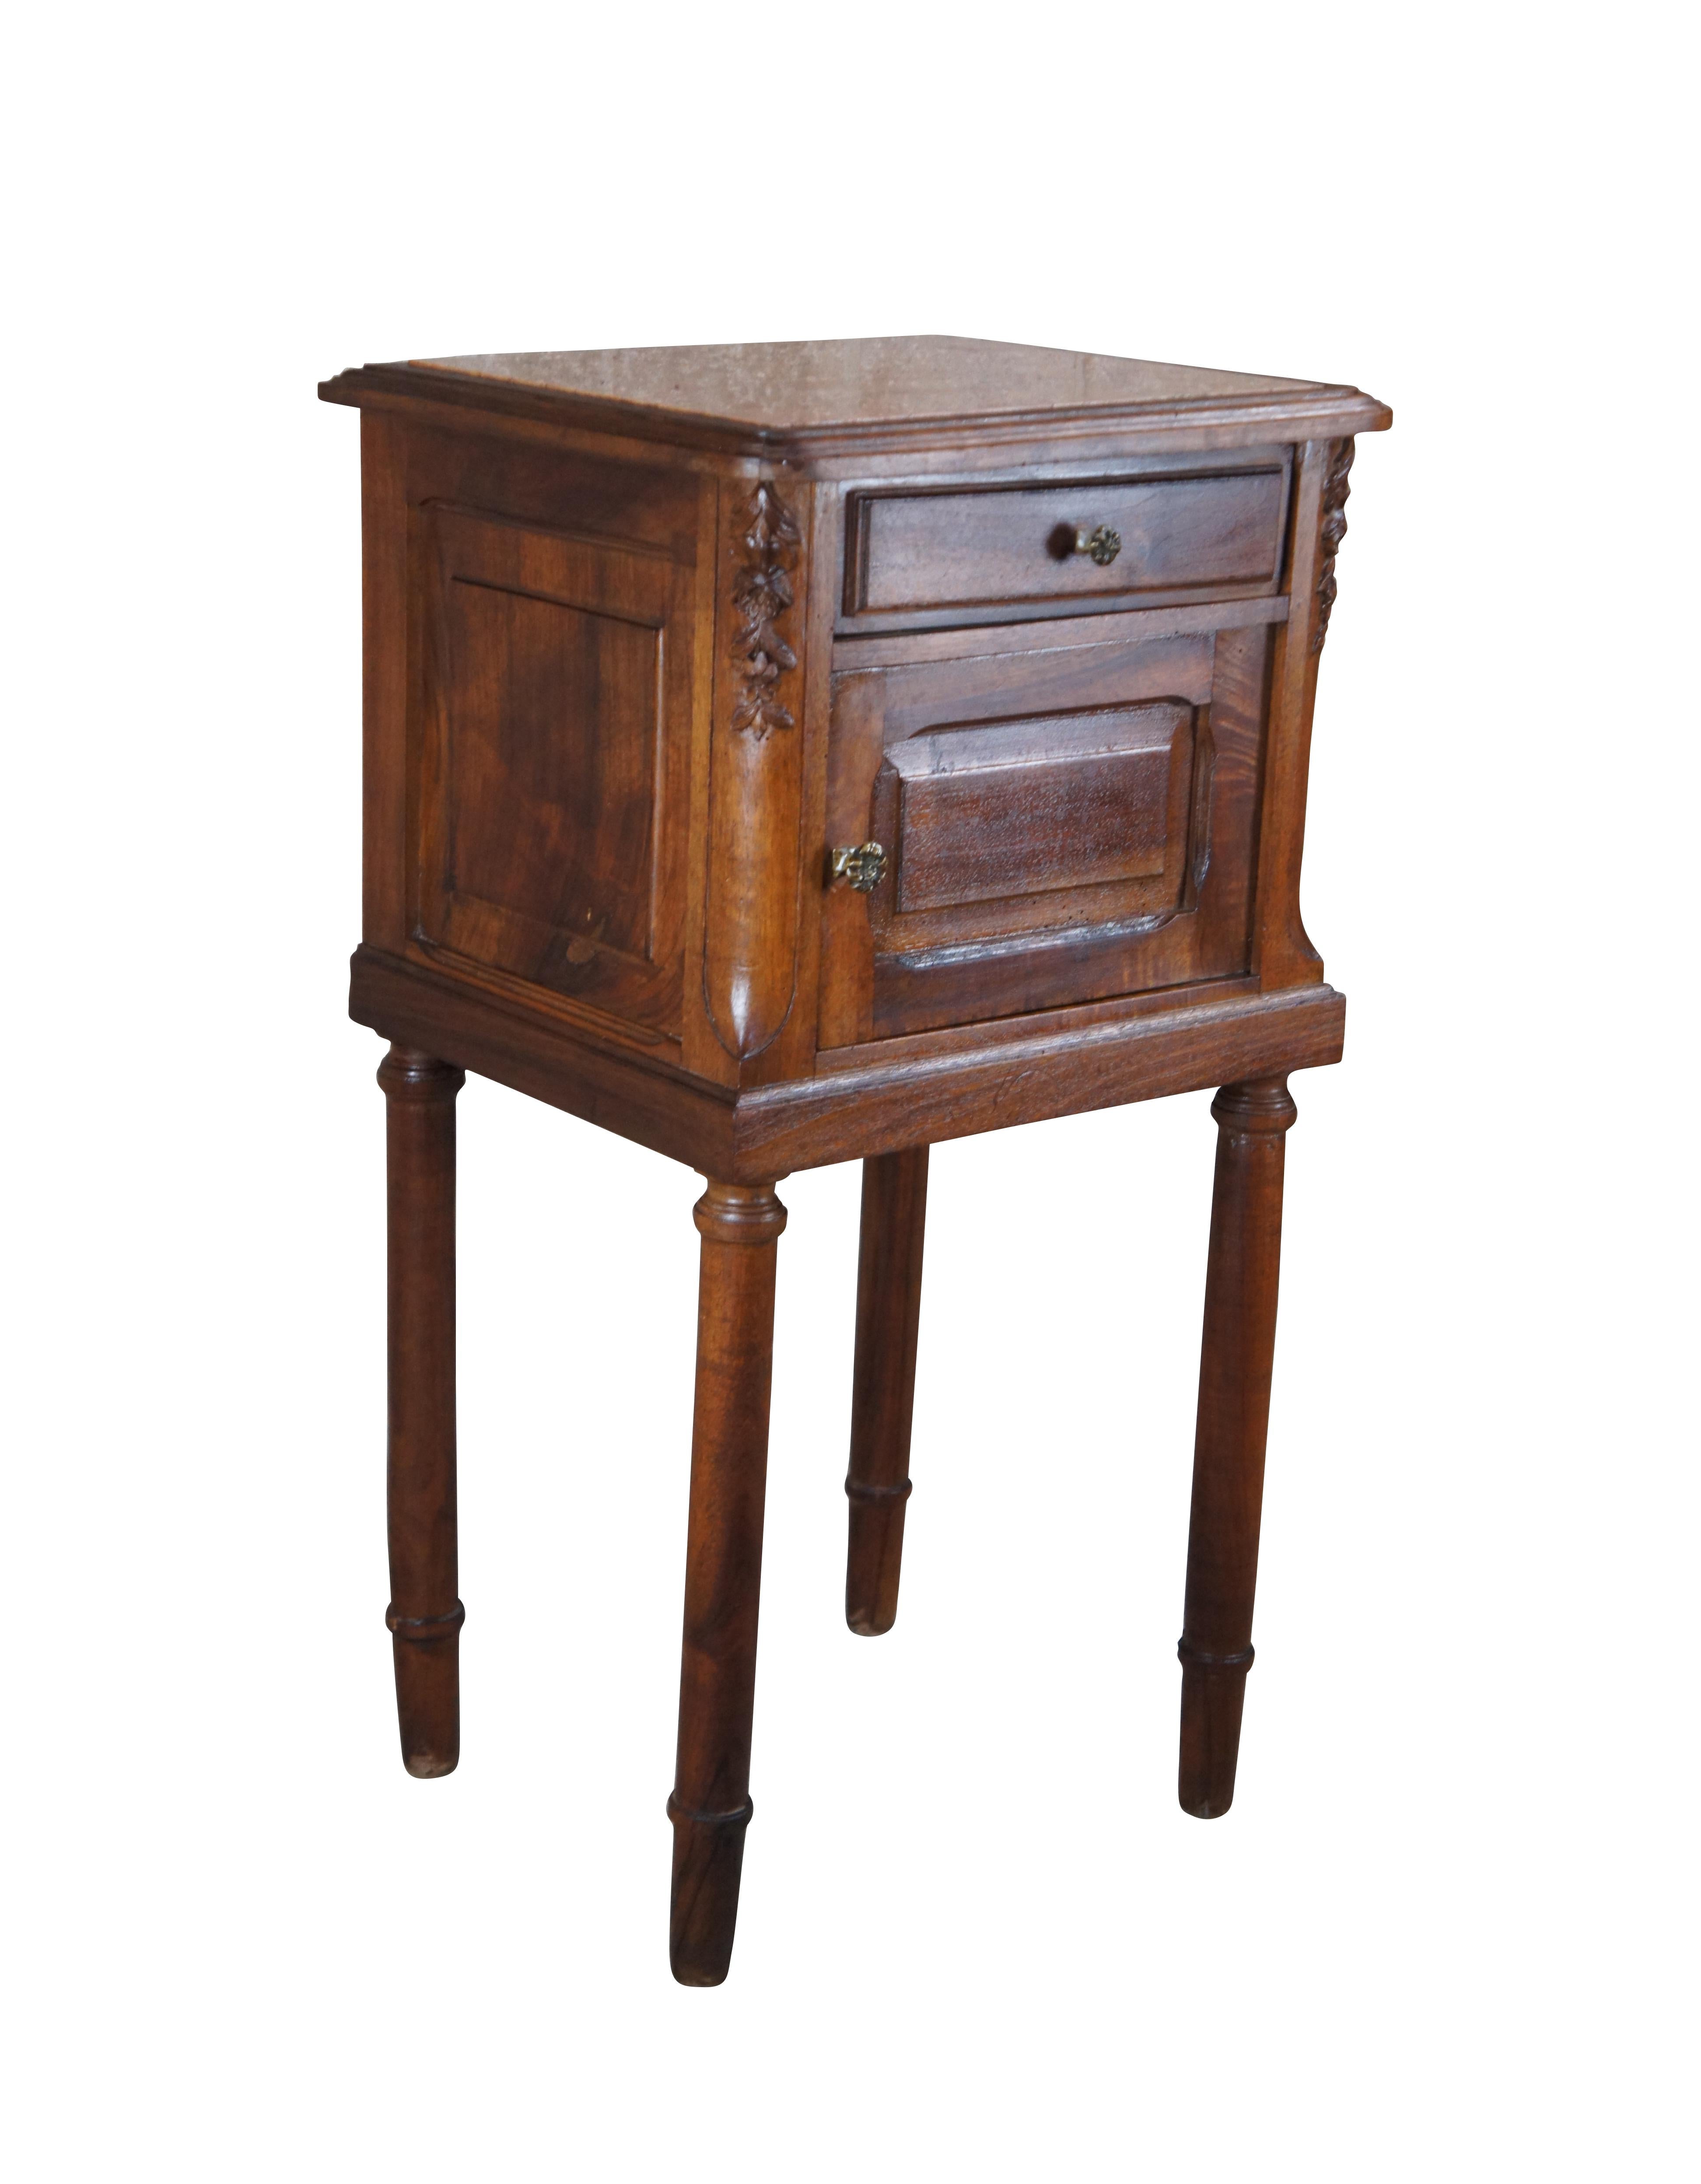 A quaint 19th century French bedside table / cabinet. Made from walnut with inset travertine top. Features a central hand dovetailed drawer made from oak and lower cabinet. Stiles are chamfered and carved with foliate motif. The cabinet rests on